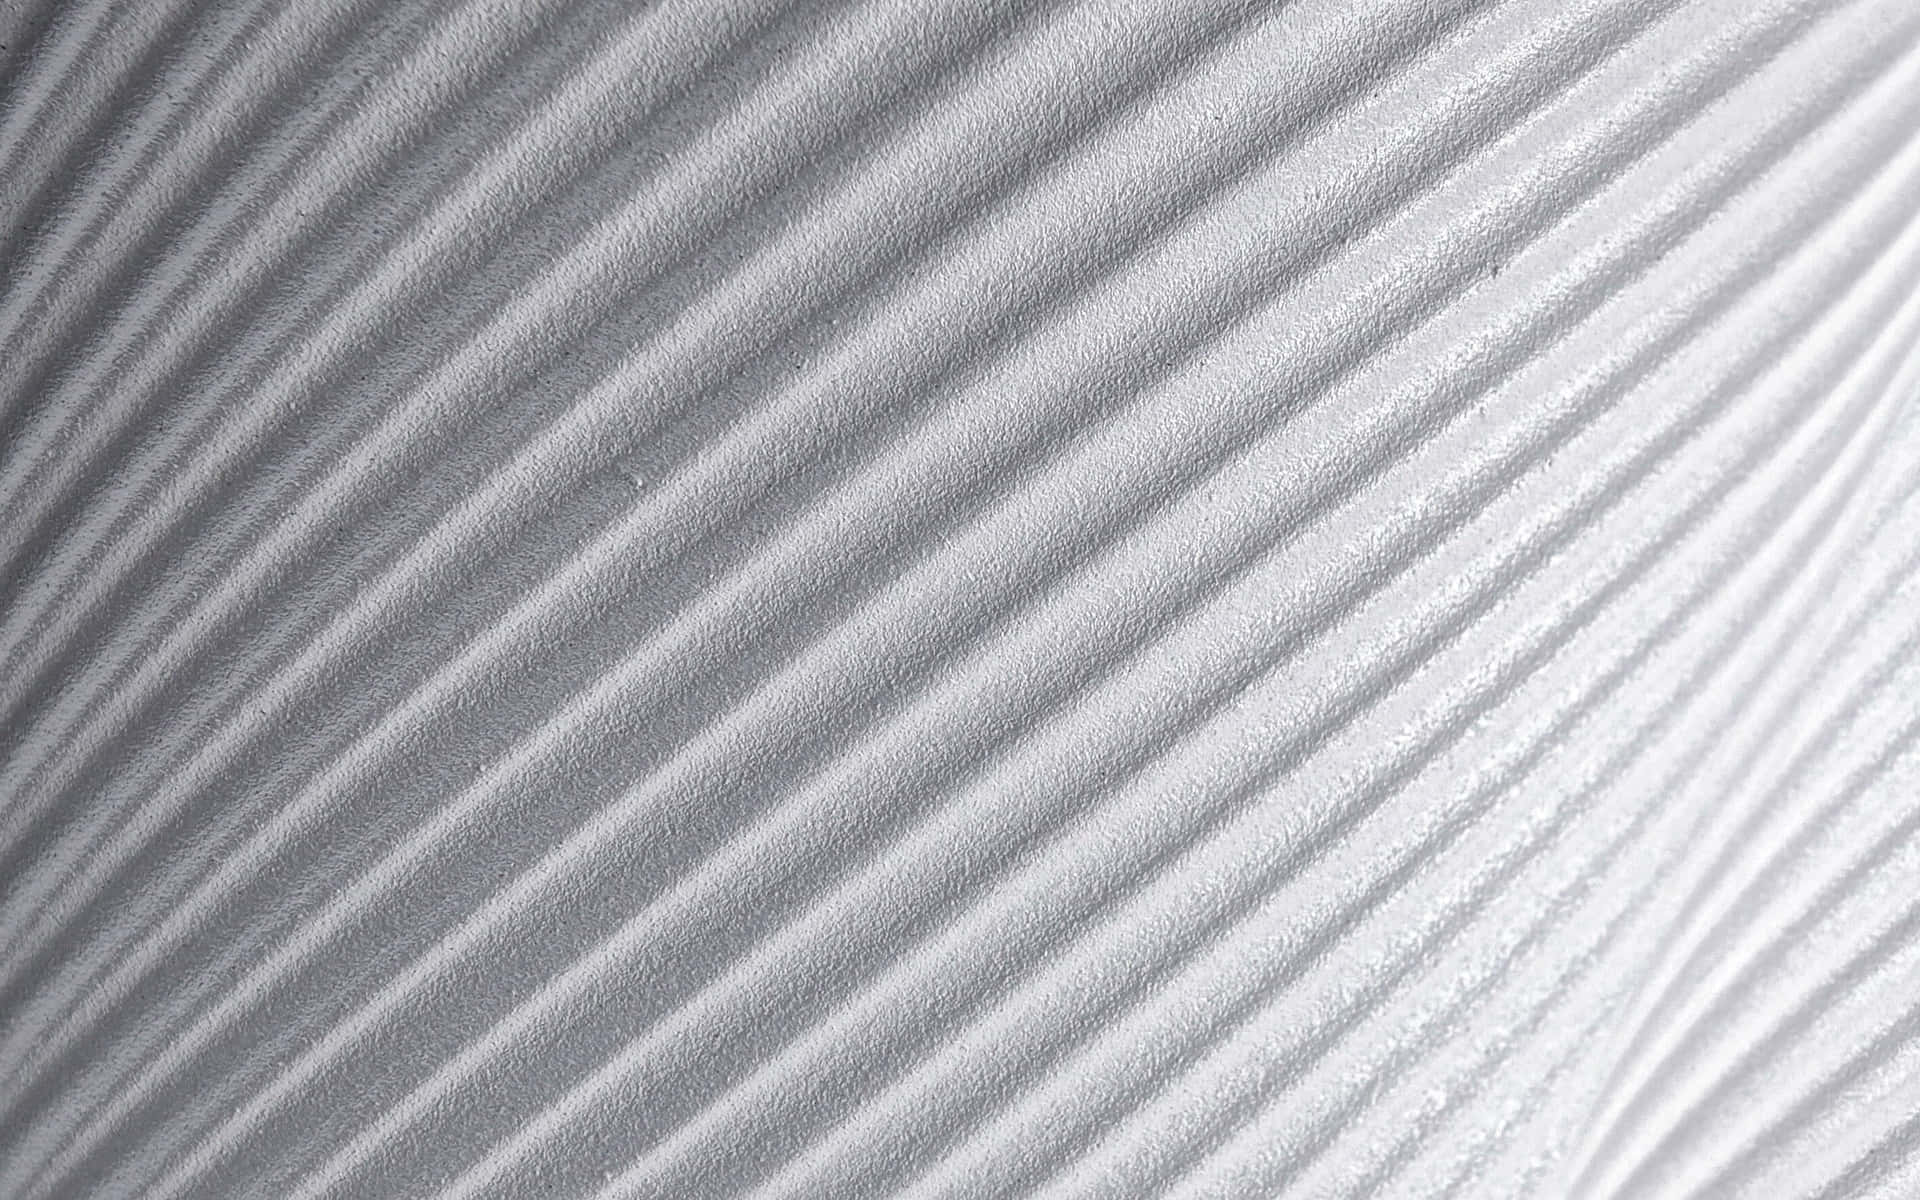 Rough Wavy Lines White Texture Background